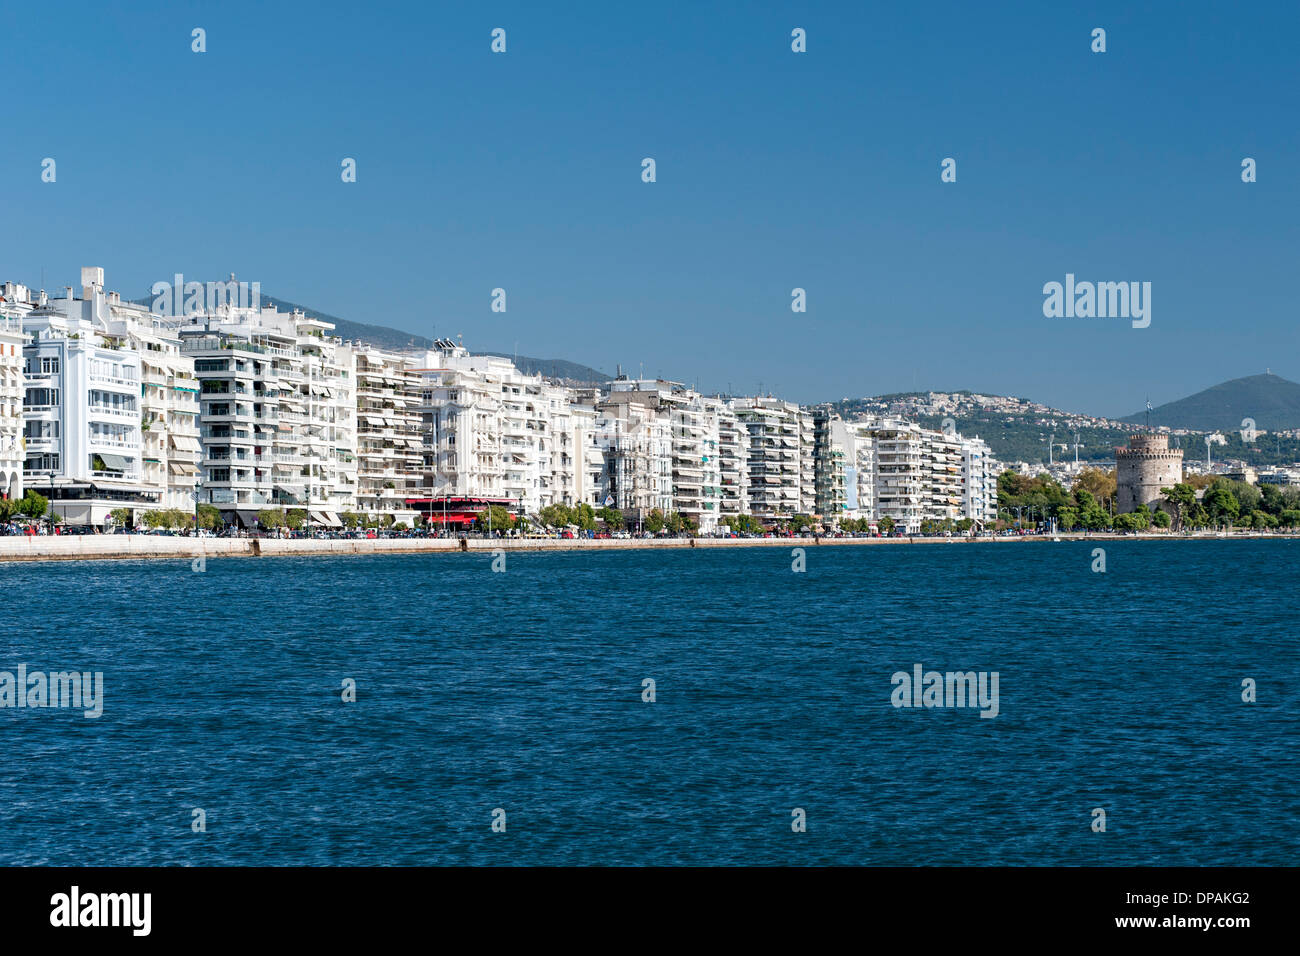 The waterfront and buildings on Nikis Avenue in Thessaloniki, Greece. Stock Photo